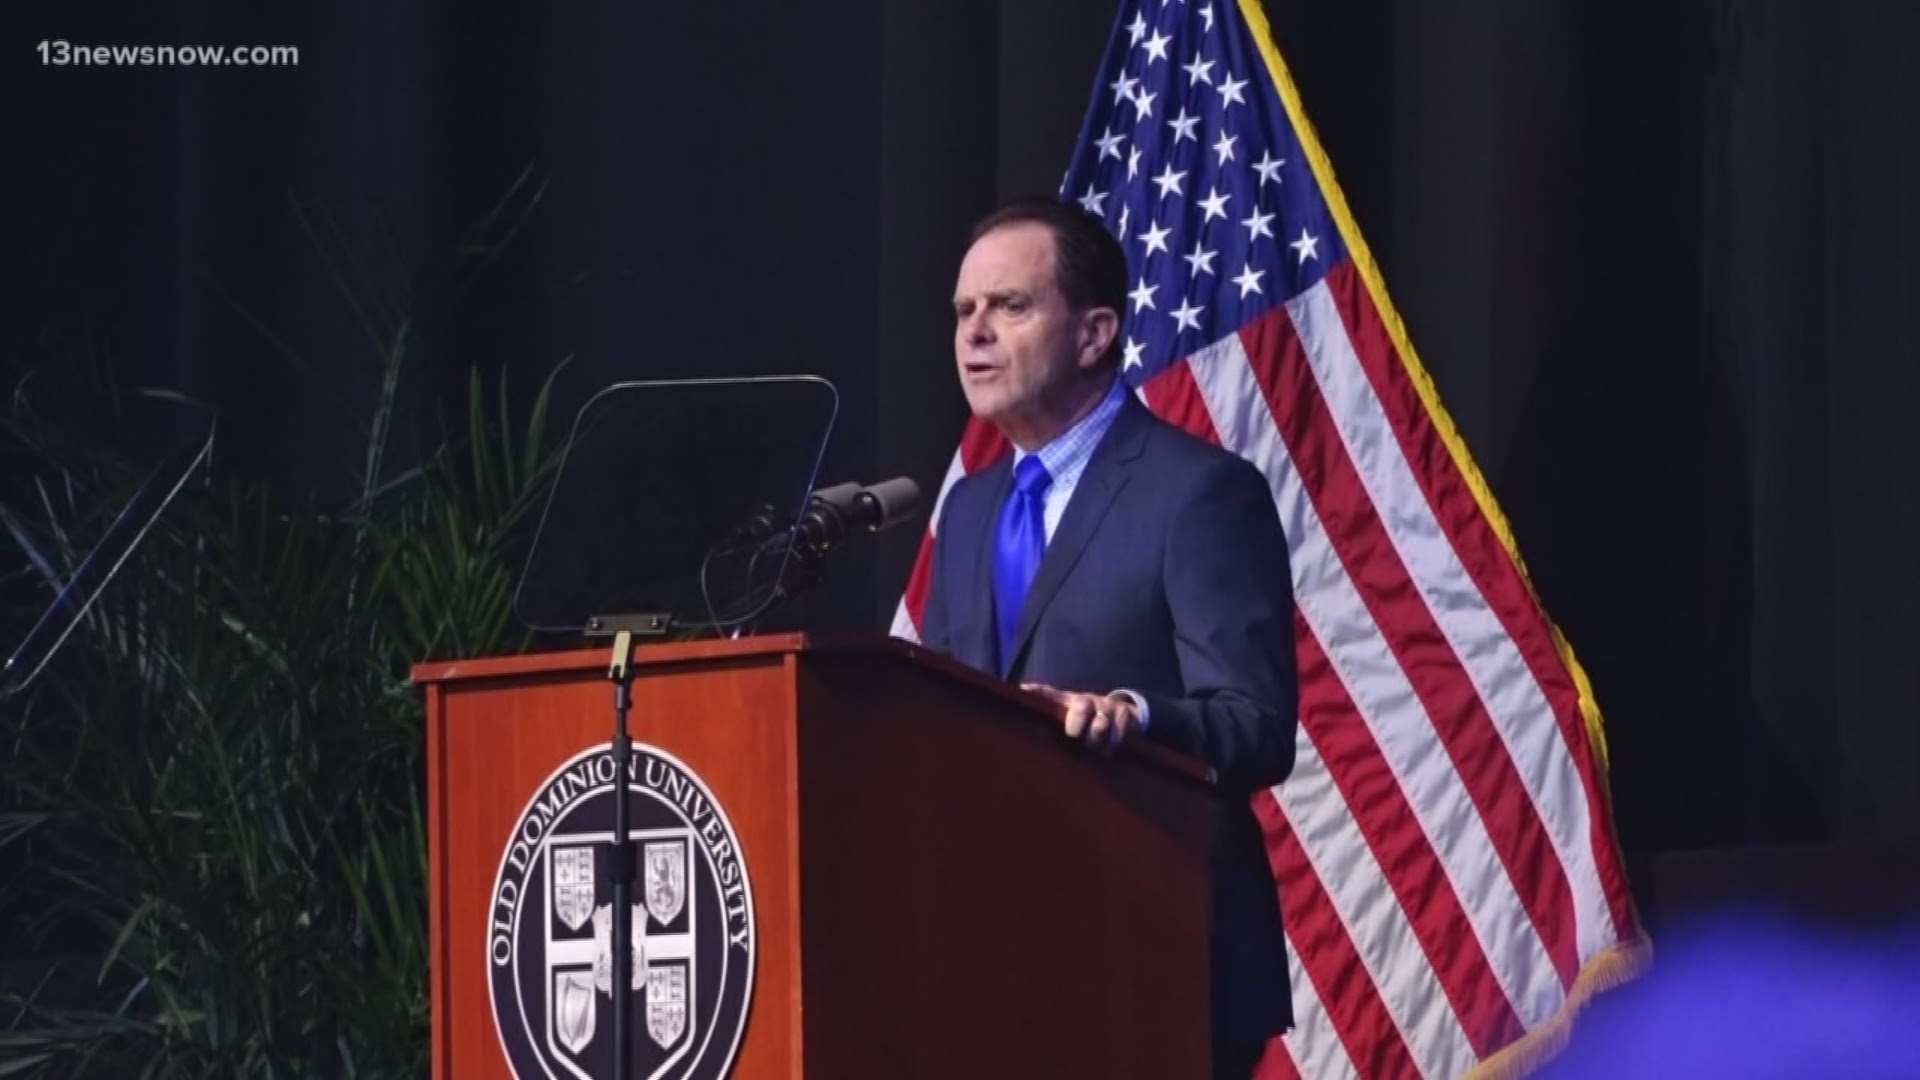 The President of Old Dominion University gave his state of the university address. A few highlights include President John Broderick announced a multi-million dollar for the university's coastal adaptation initiative which focuses on flooding and sea-level rise.